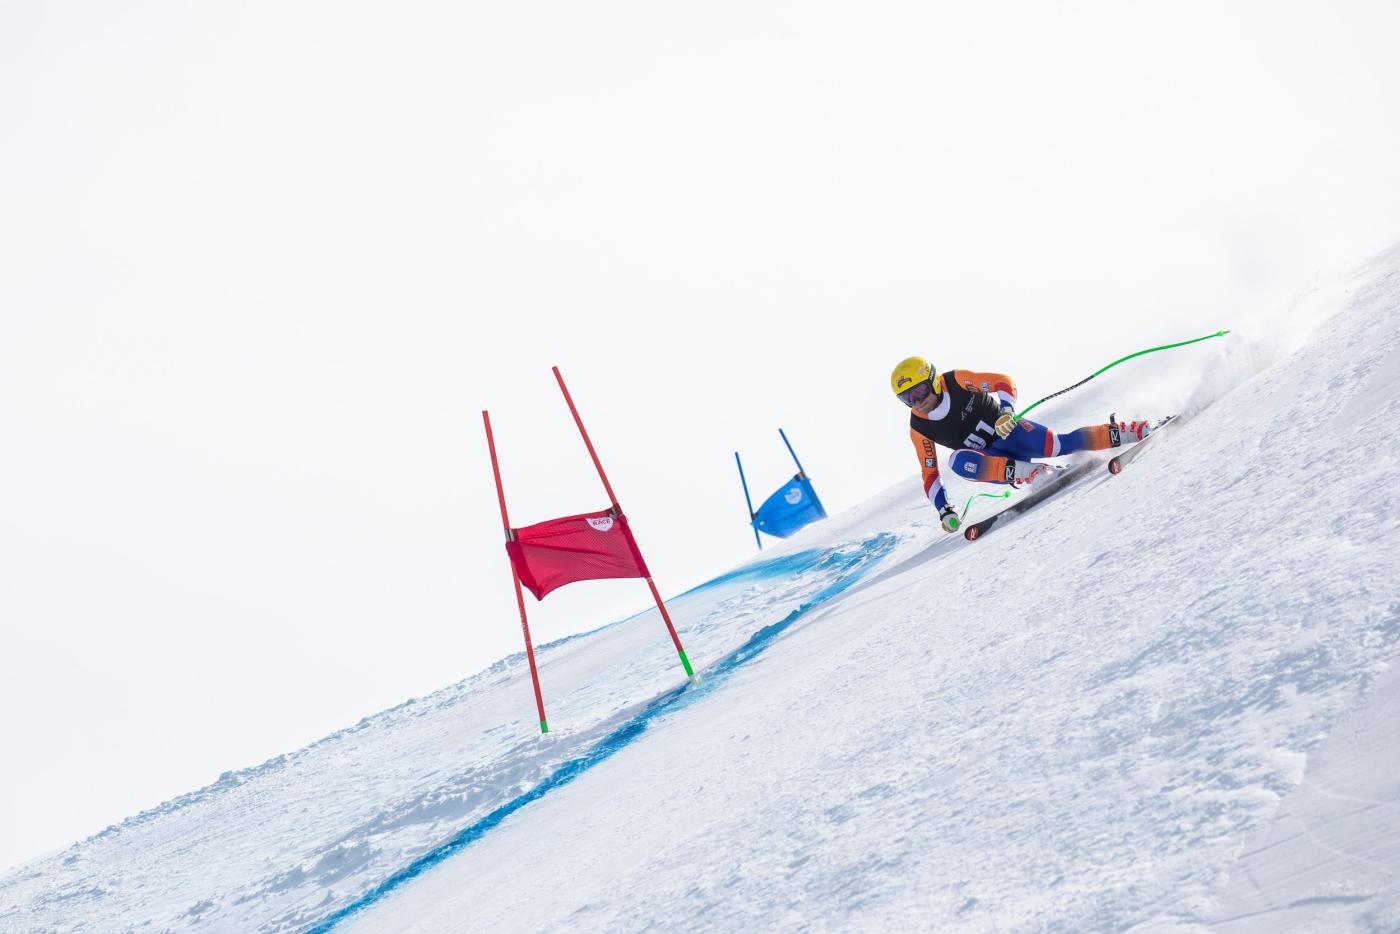 Winter Games NZ Skiier competing in the FIS ANC Alpine Super-G x2